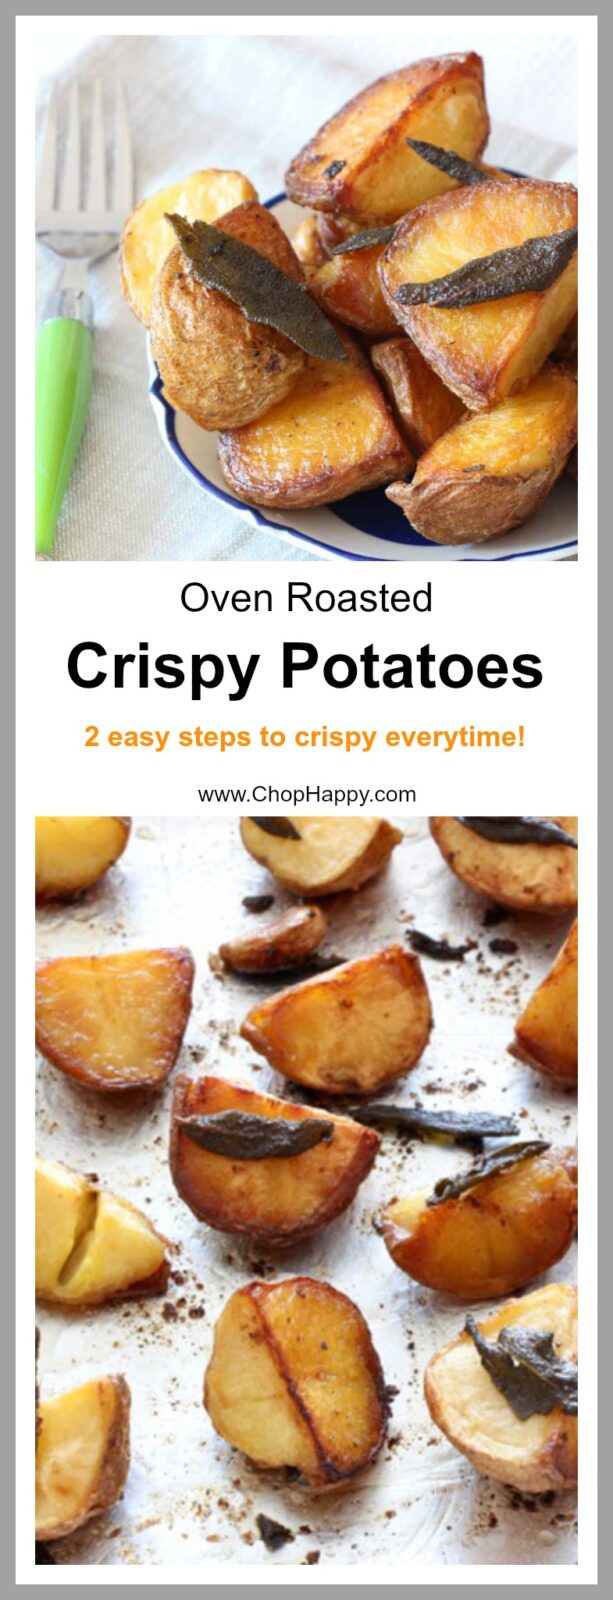 Crispy Oven Roasted Potato Recipe- is easy and two steps to perfect crispy potatoes every time. They are going to be your new family favorite treat. www.ChopHappy.com 